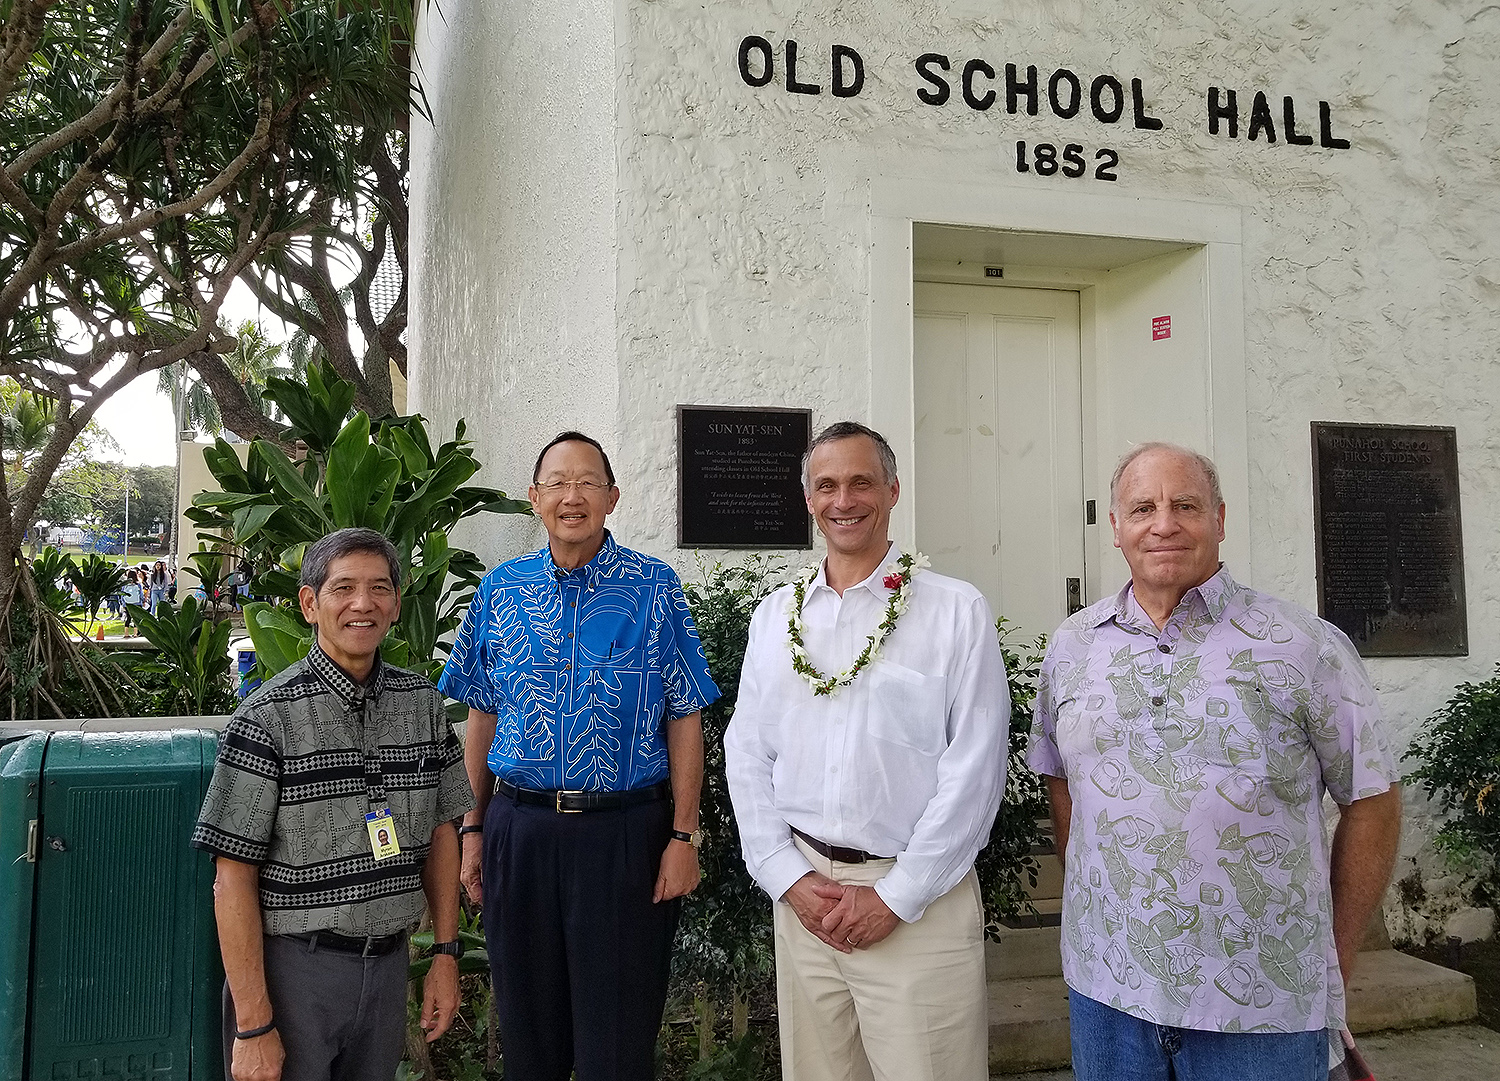 President Roth also visited the Punahou School, where Barack Obama graduated in 1979. Pictured at left is Myron Arakawa, director of college guidance; Warren Luke '66; Michael Roth and Hardy Spoehr '66.